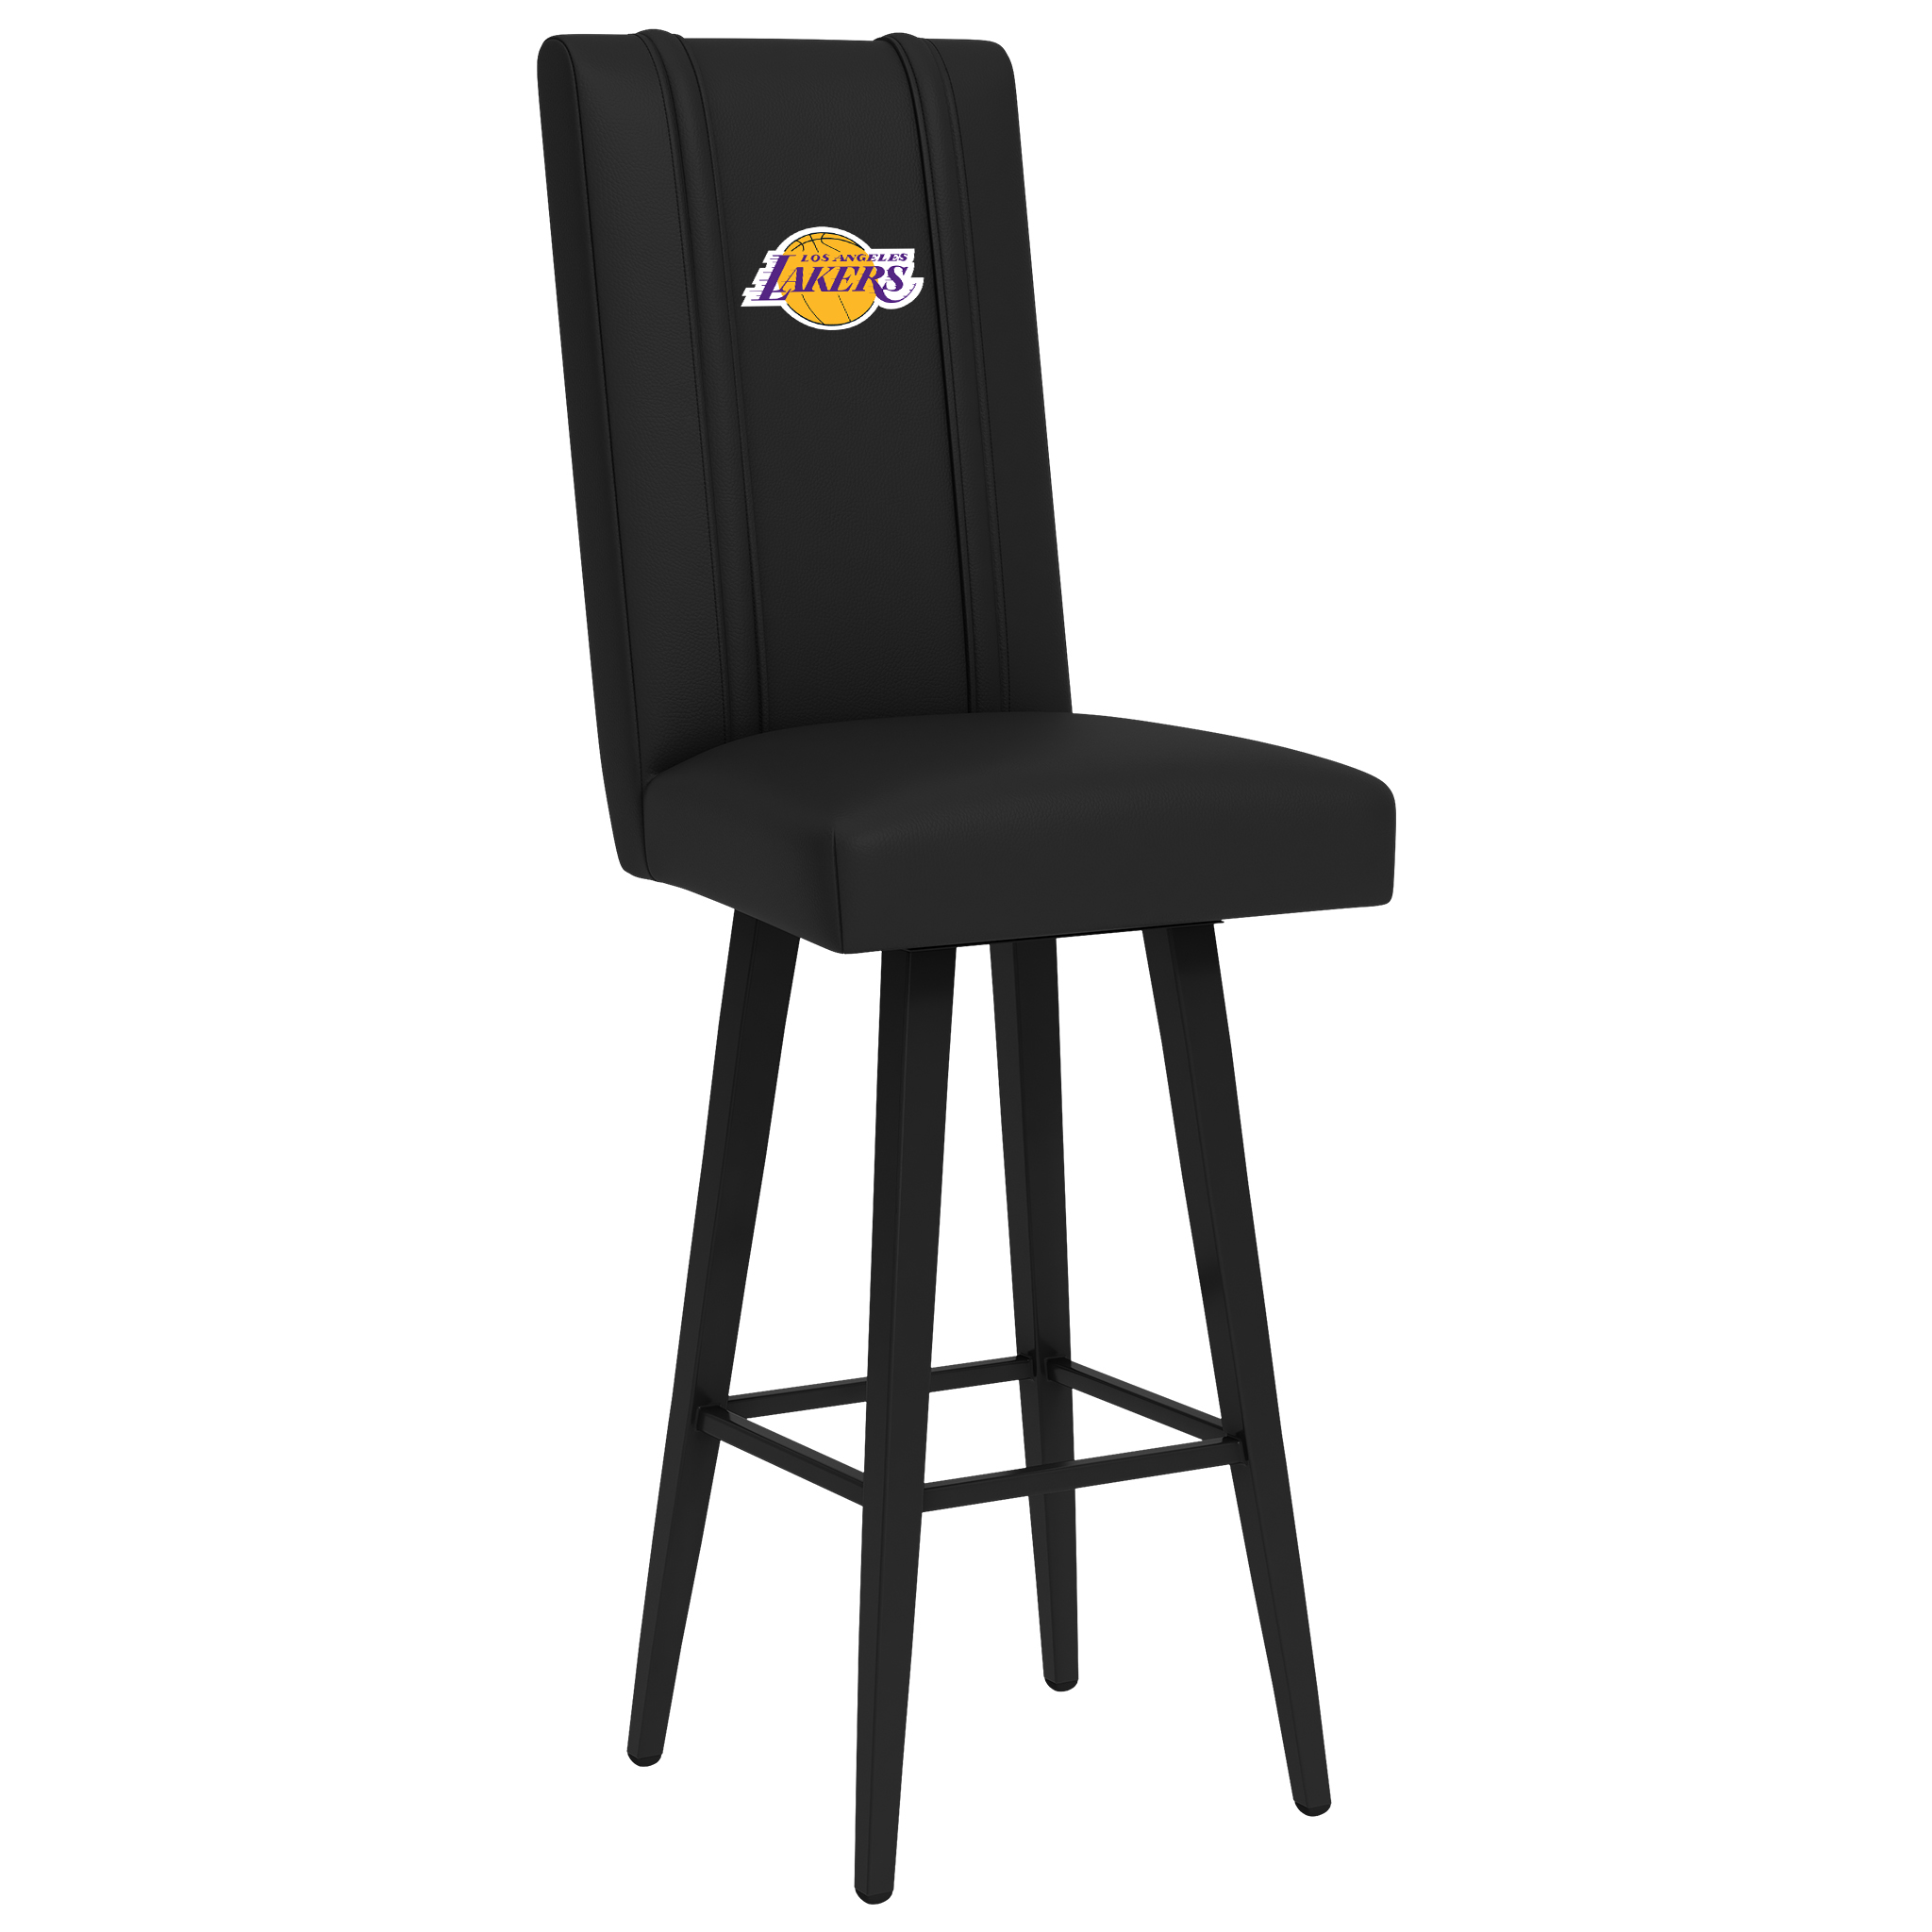 Los Angeles Lakers Swivel Bar Stool 2000 With Los Angeles Lakers Logo